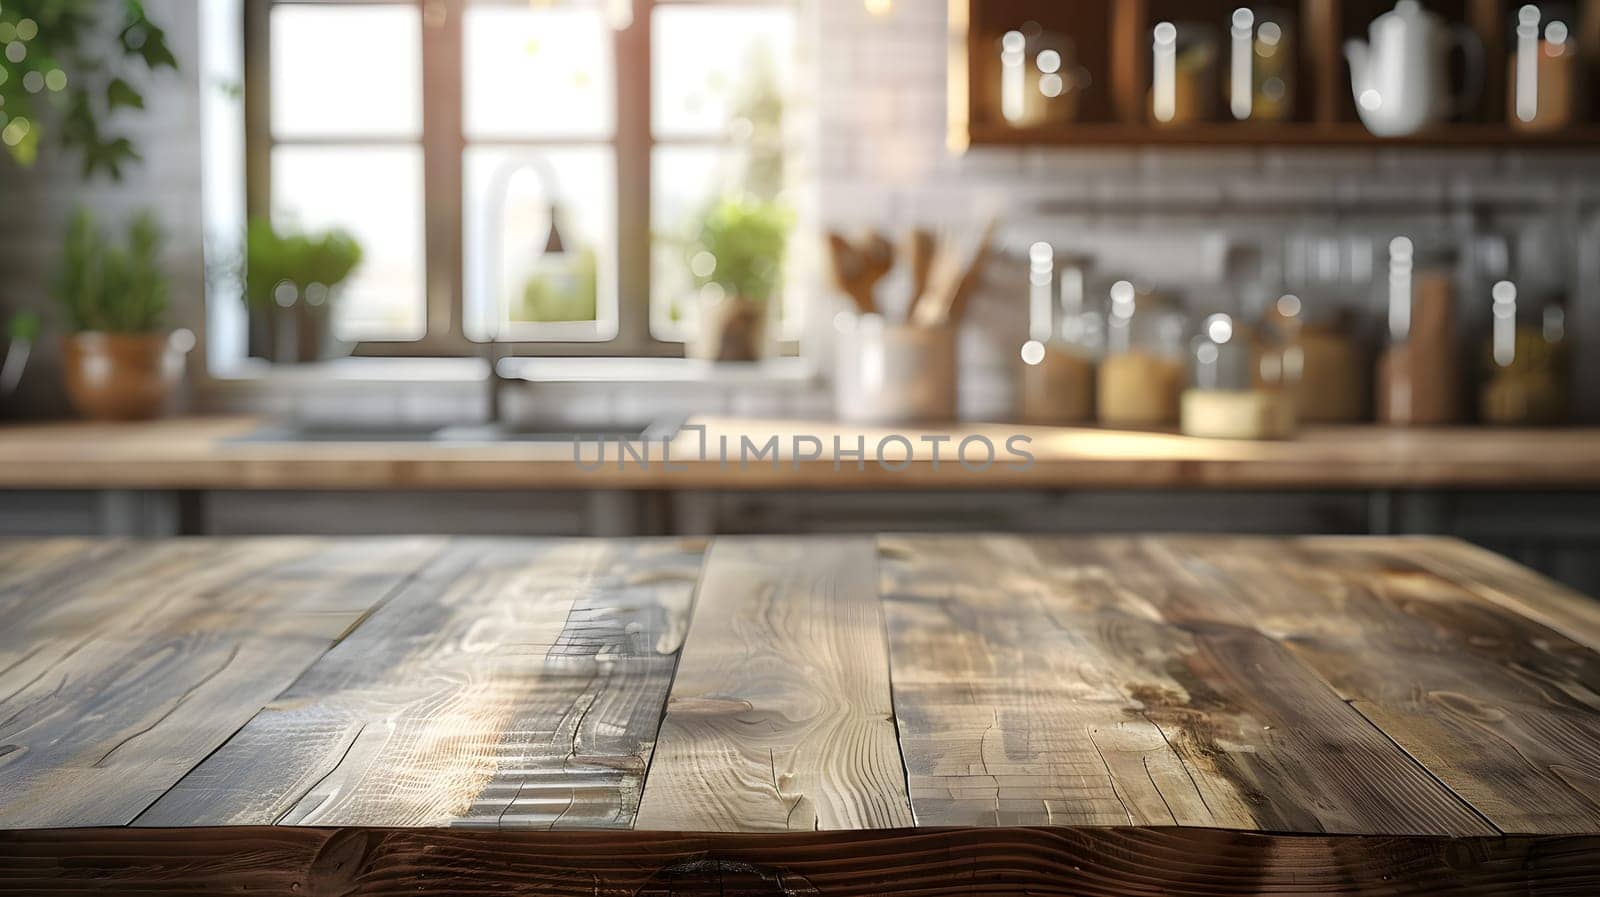 A hardwood table is in the foreground, with a kitchen in the background of a building. The wood stain flooring brings warmth to the house